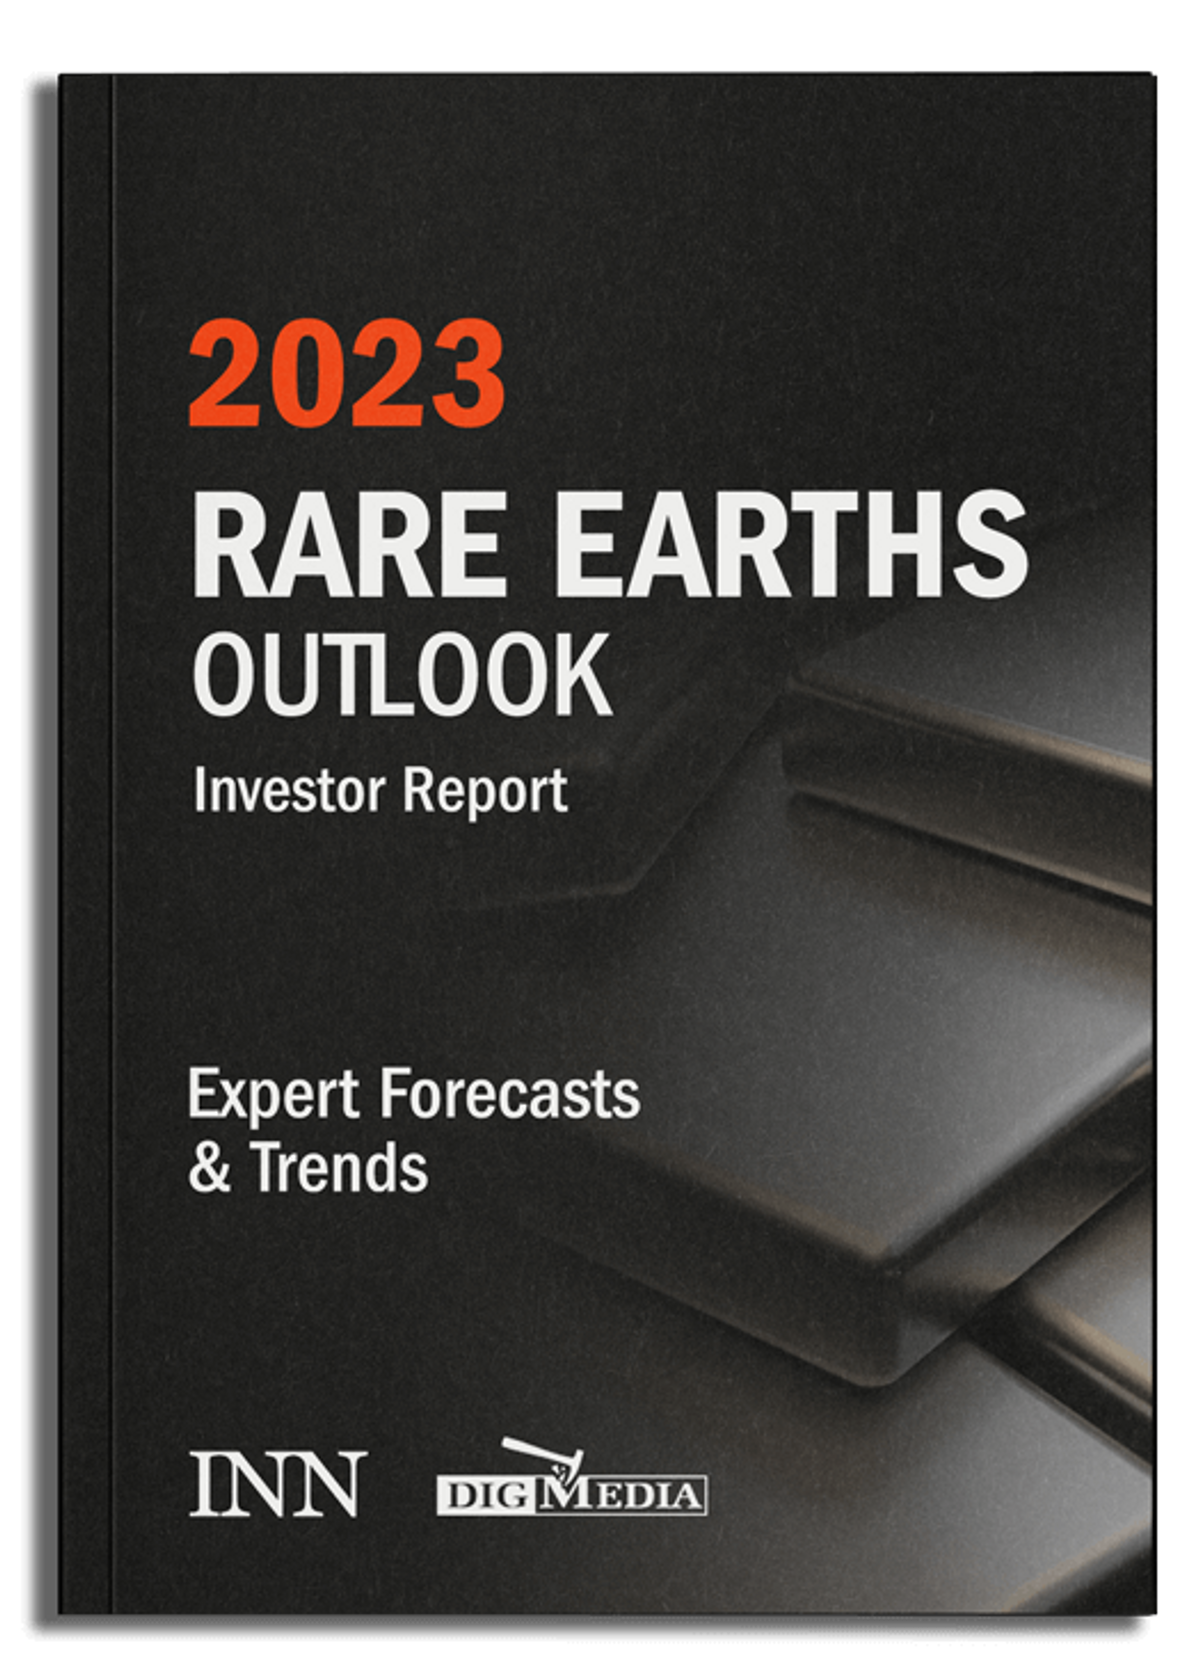 2023 Rare Earths Outlook Report (Updated!)